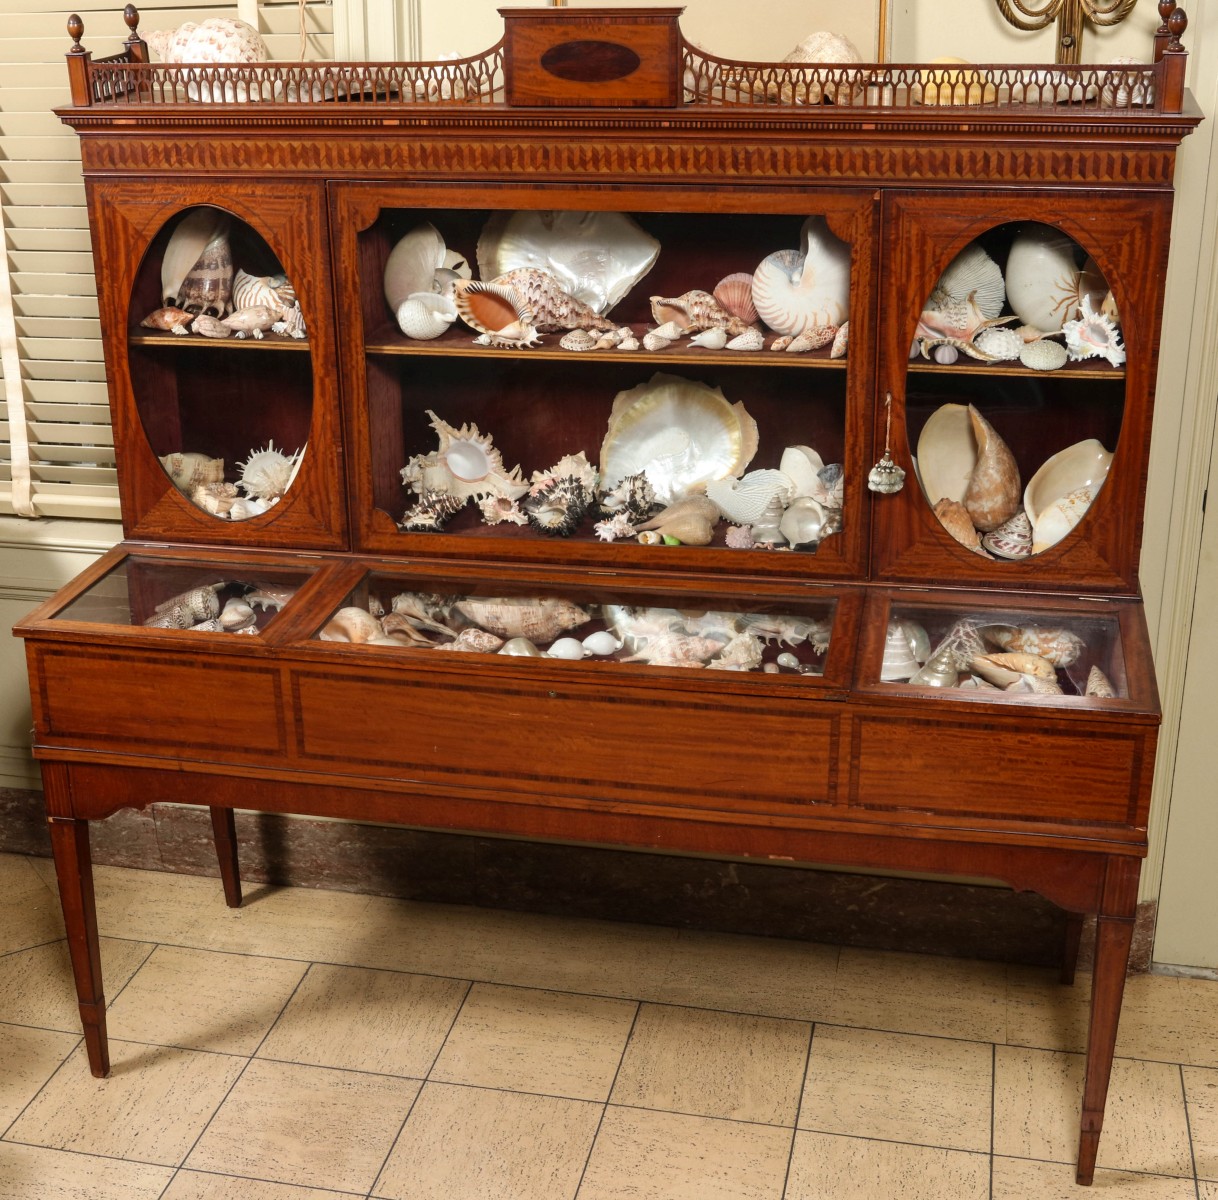 AN EDWARDIAN SPECIMEN CABINET WITH SEA SHELL COLLECTION